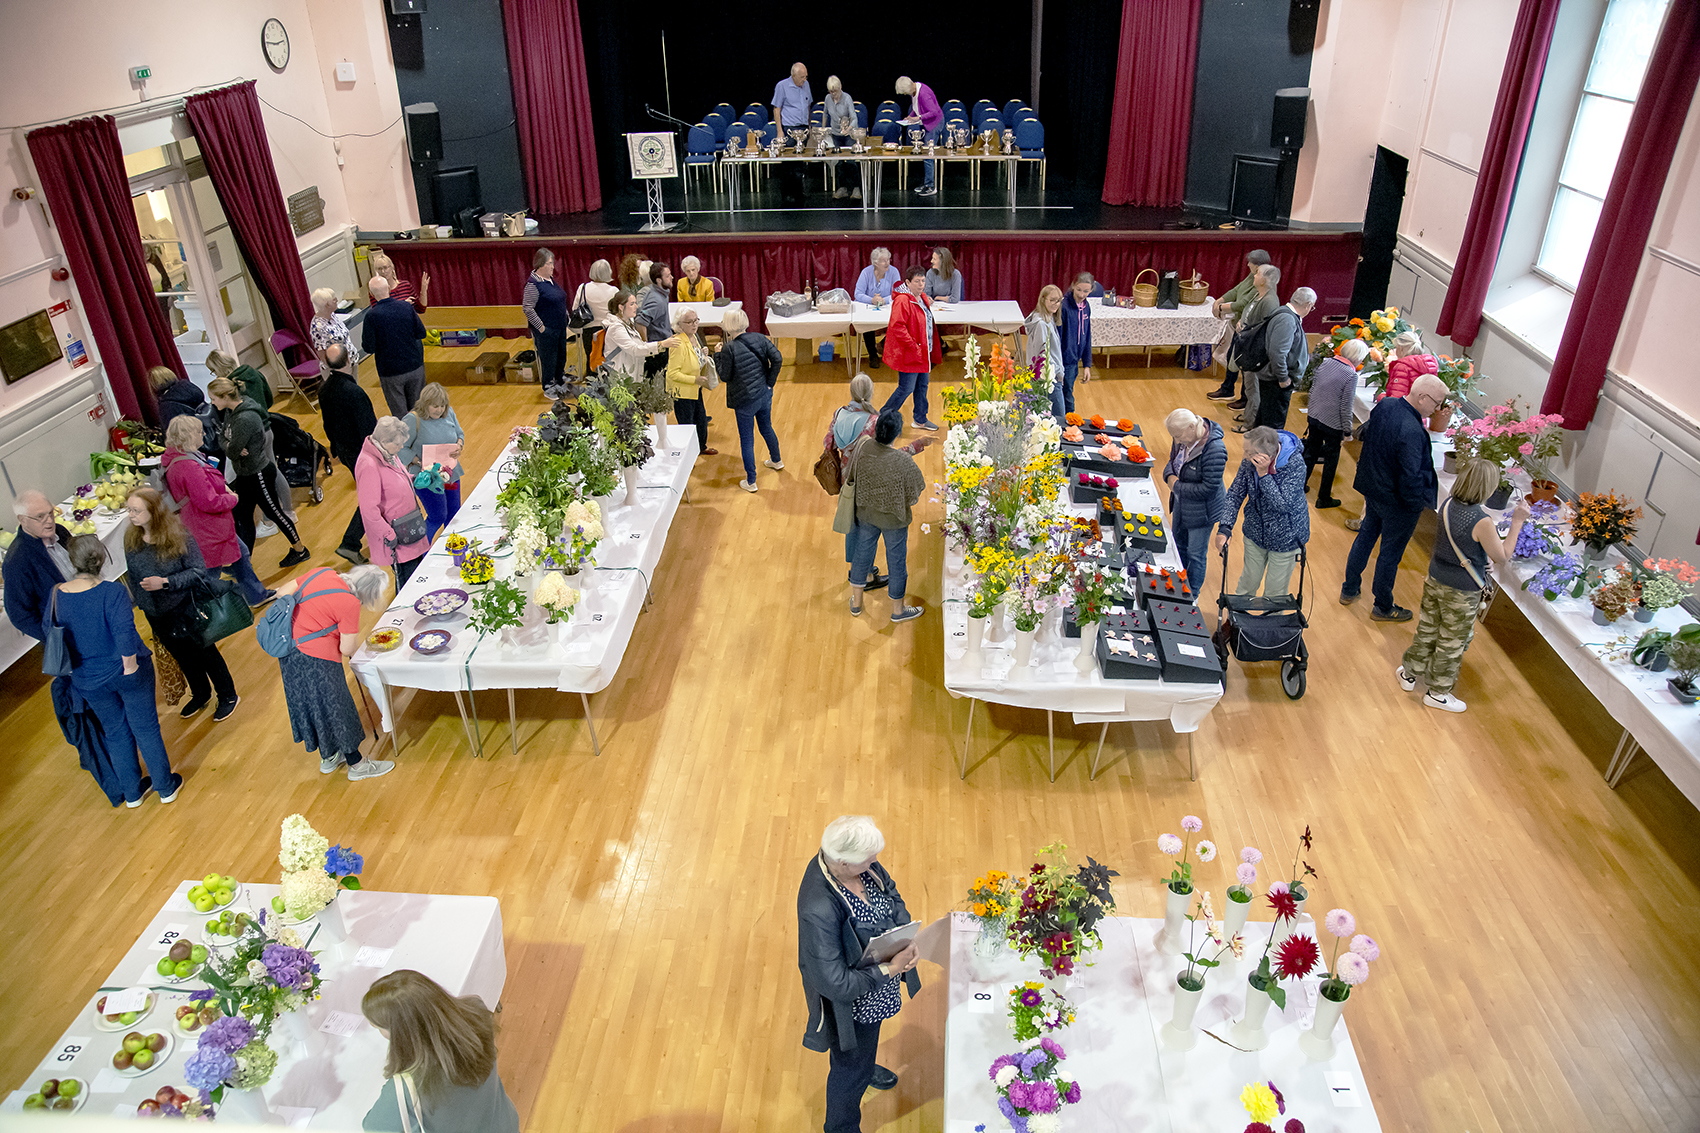 A riot of colour at the Victoria Halls as the fruits (and flowers, and vegetables) of months of hard work in the towns gardens and greenhouses was shown off to the public